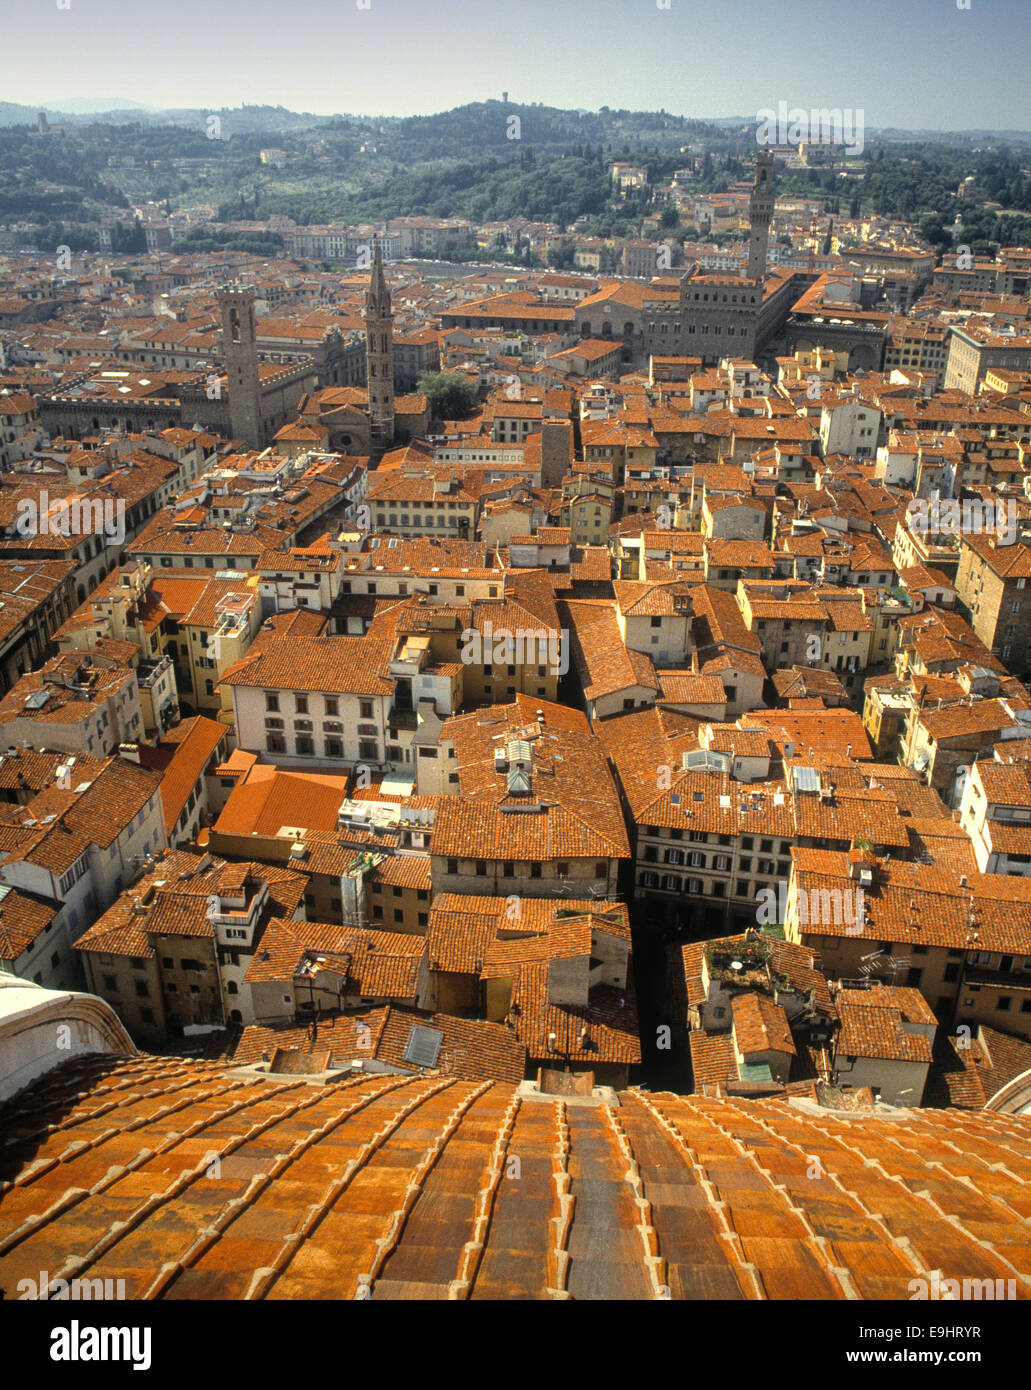 Florence or Firenze (also once called Fiorenza or Florentia) is the capital city of the Italian region of Tuscany. Stock Photo